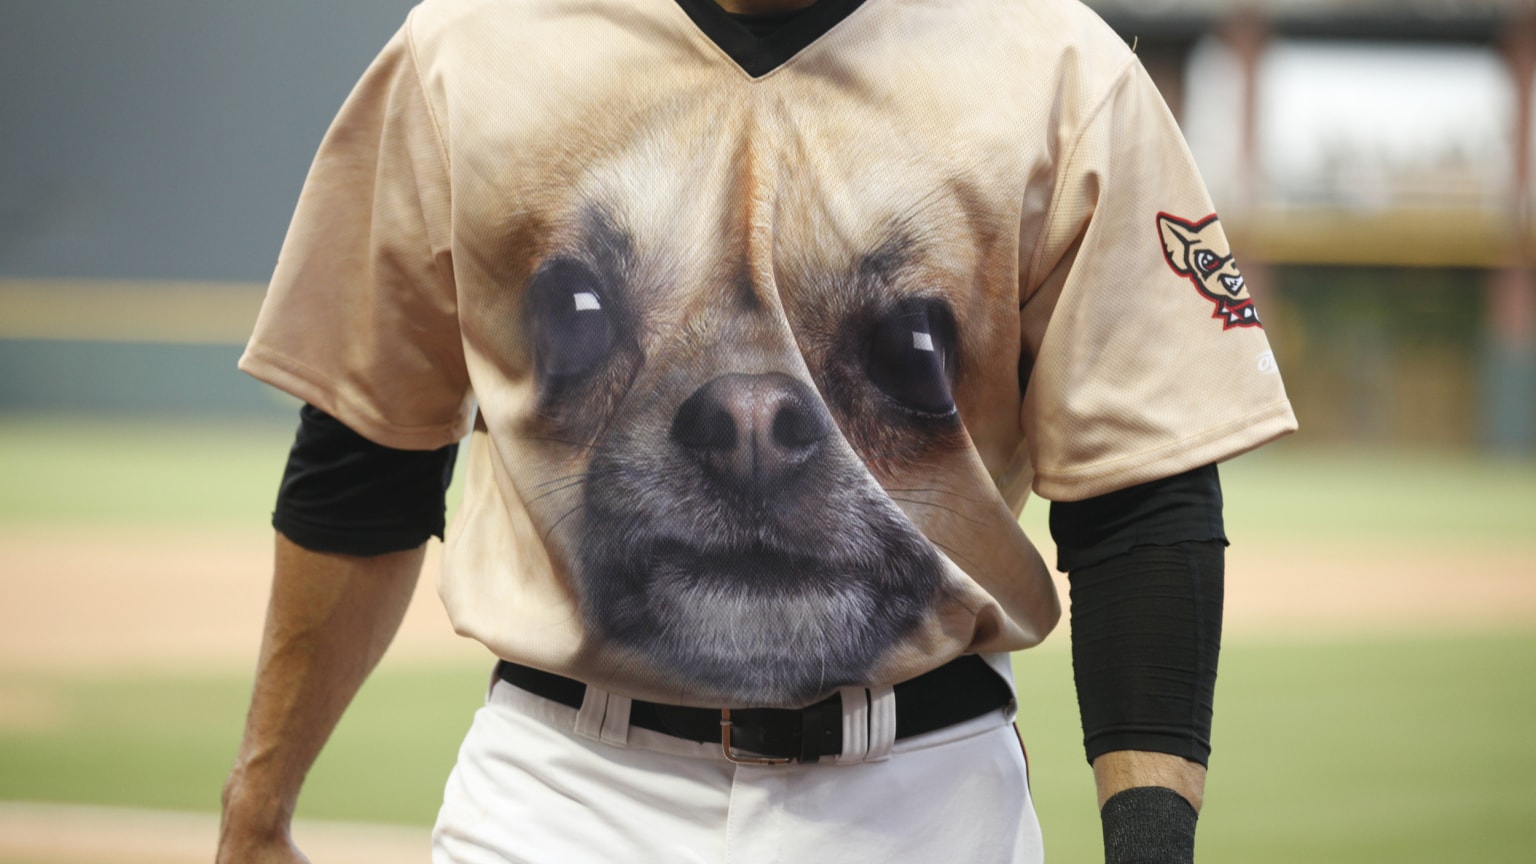 El Paso Chihuahuas unveils 10th anniversary logo, new jerseys for